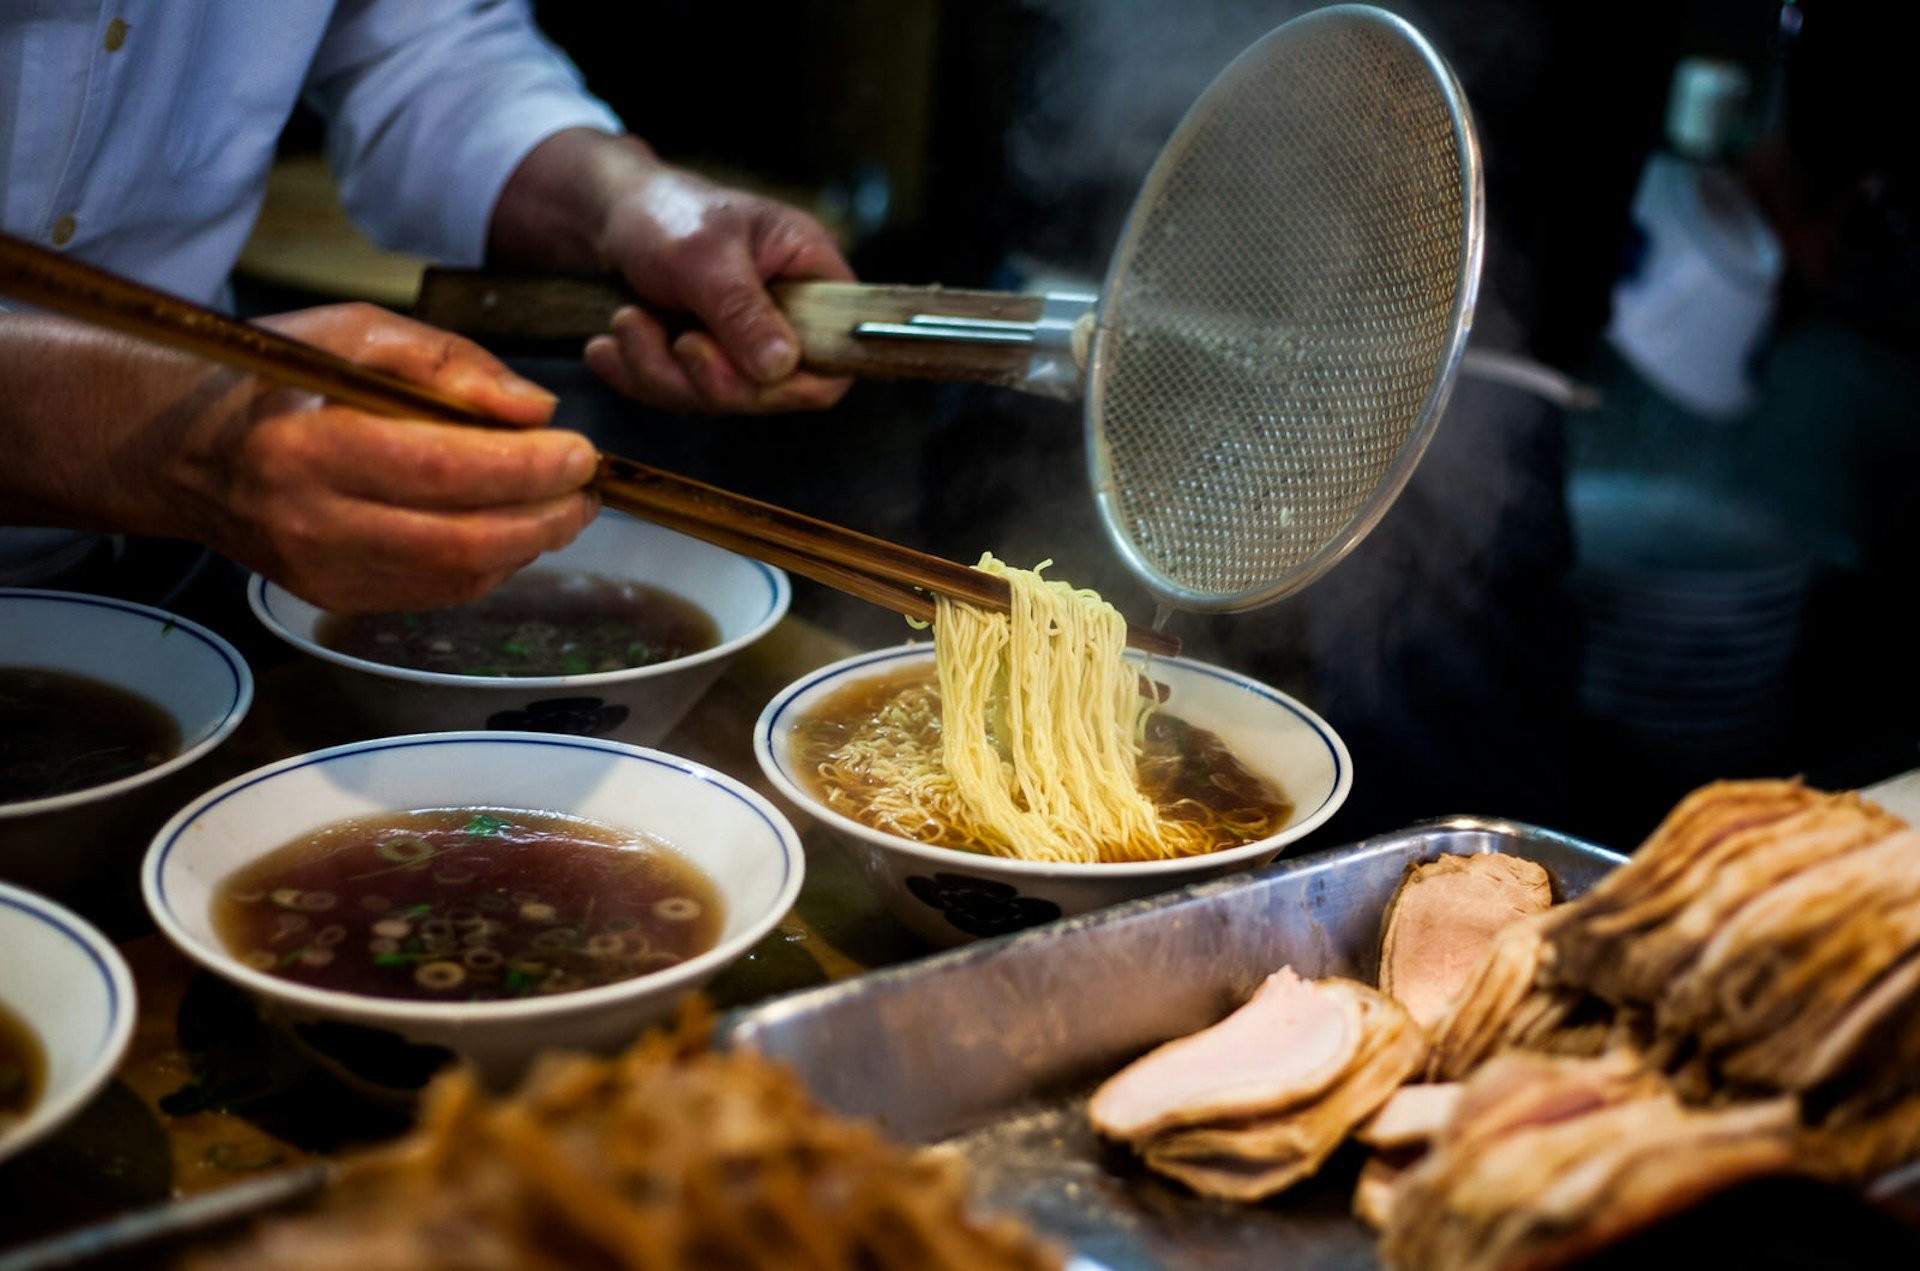 Hands preparing steaming ramen (soba) while holding long chopsticks and metal strainer. Several bowls of broth, and a metal tray of sliced pork, are in the foreground.